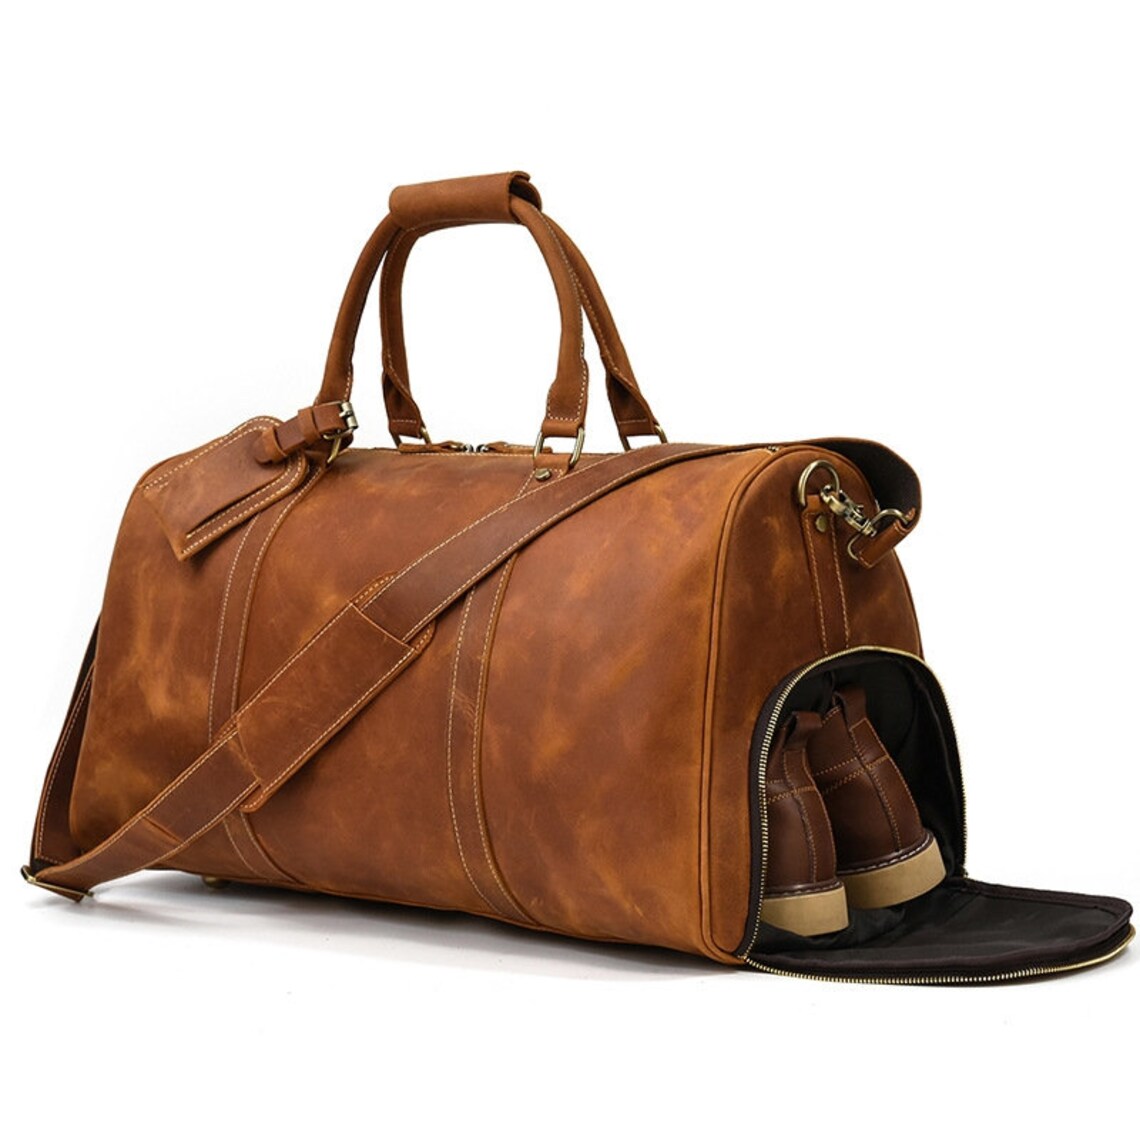 Luggage Leather Duffel Bag for Travelers